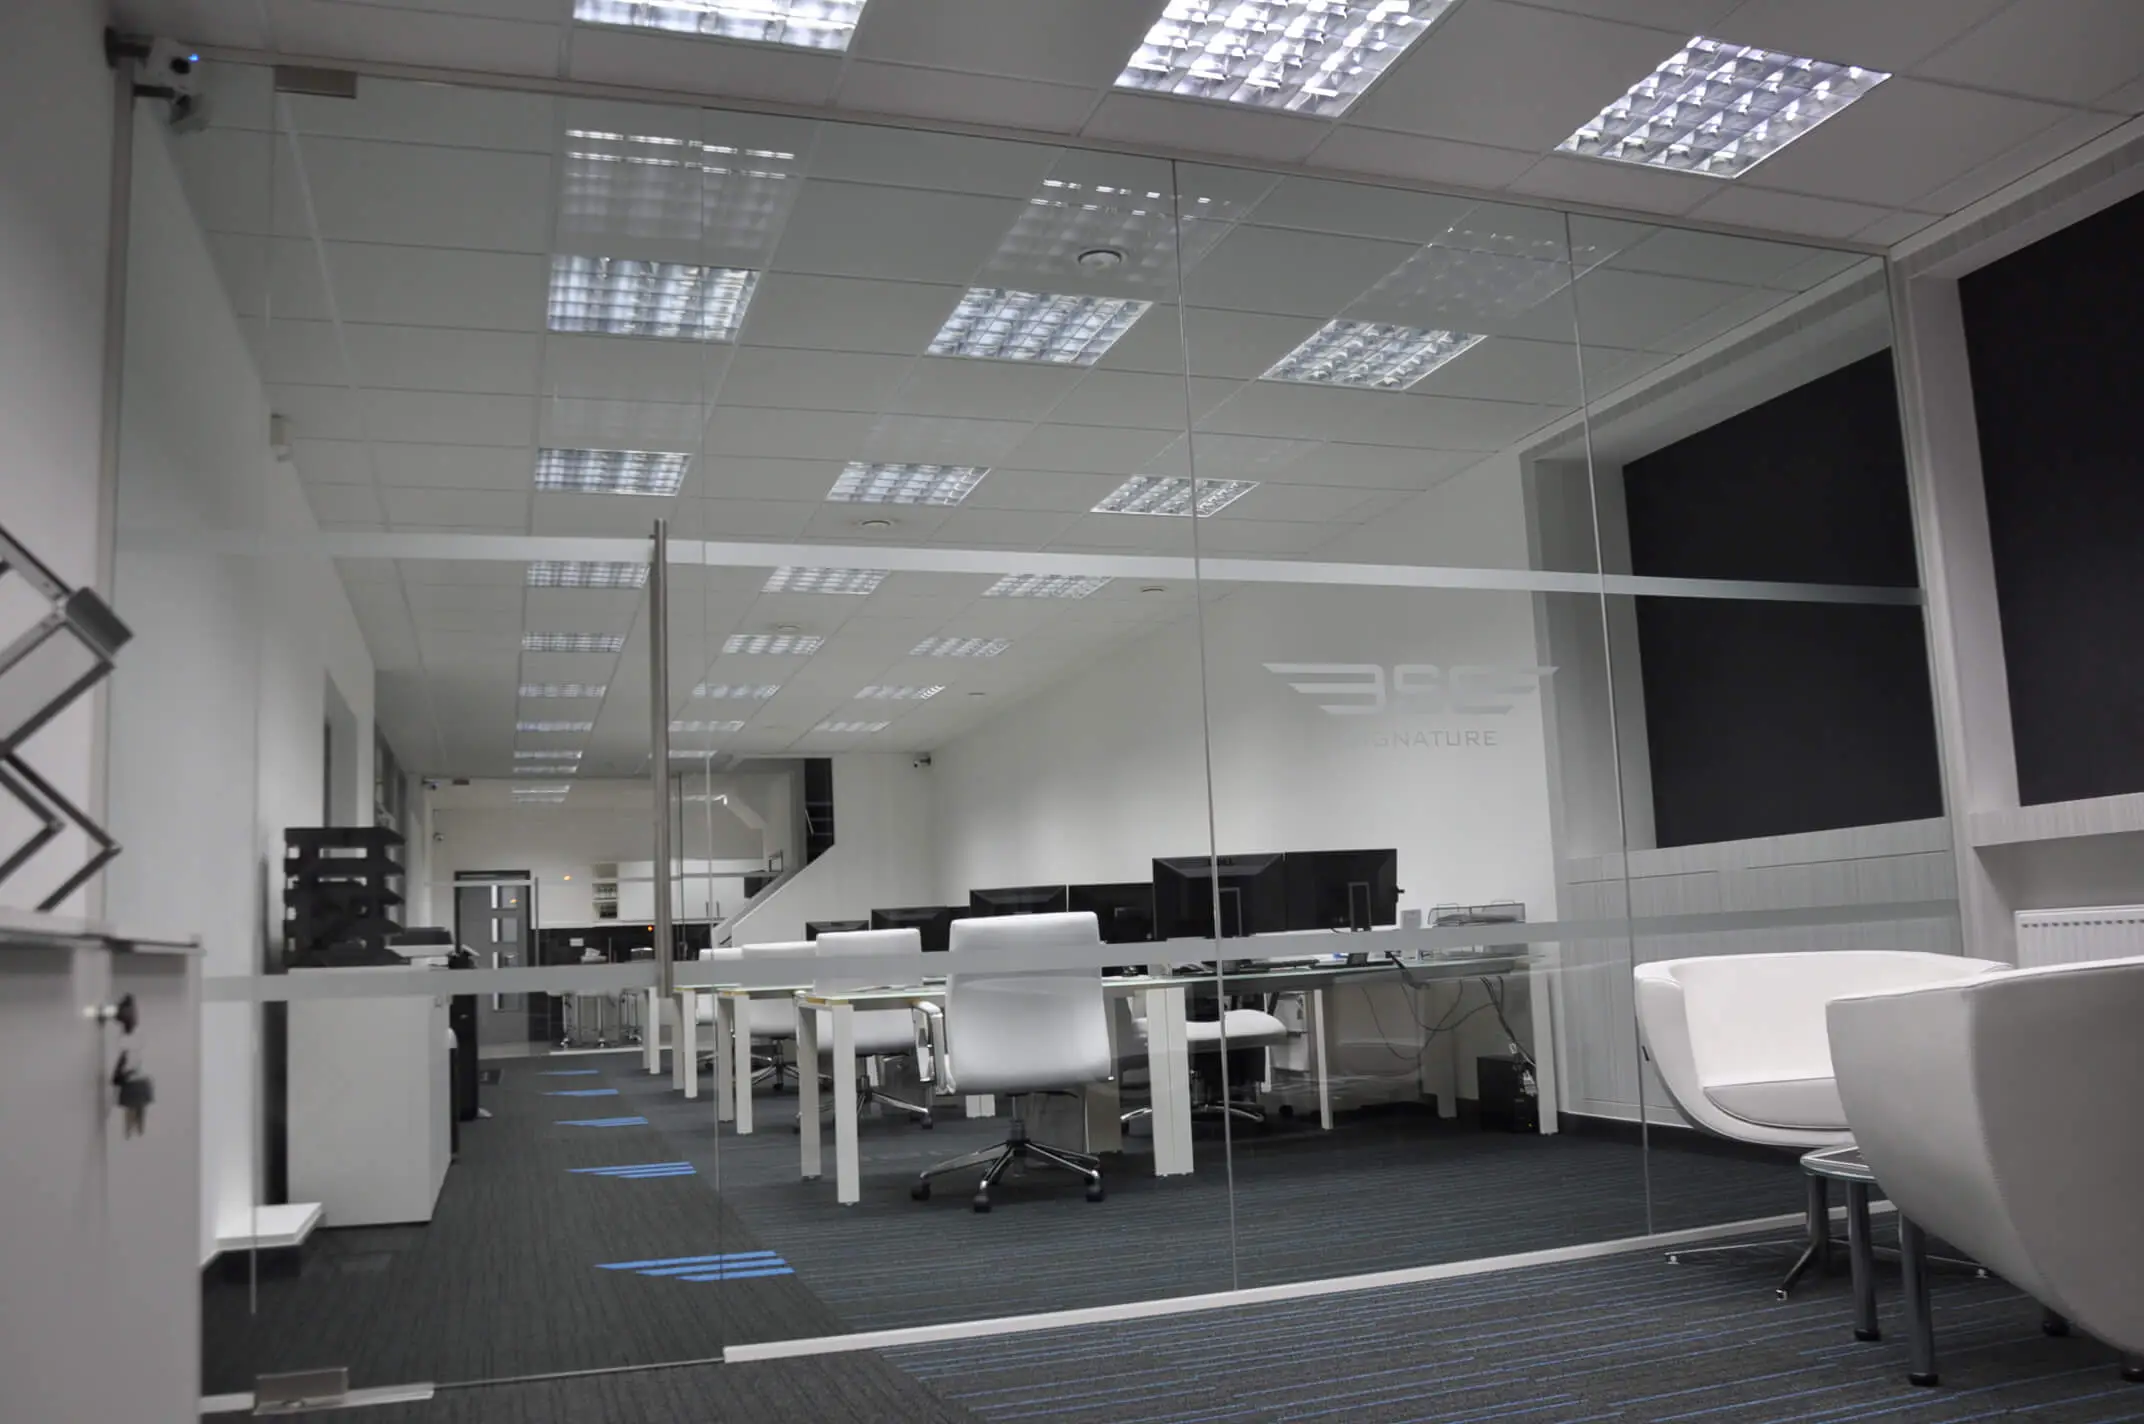 Single glazed frameless glass parttions in office space to separate space